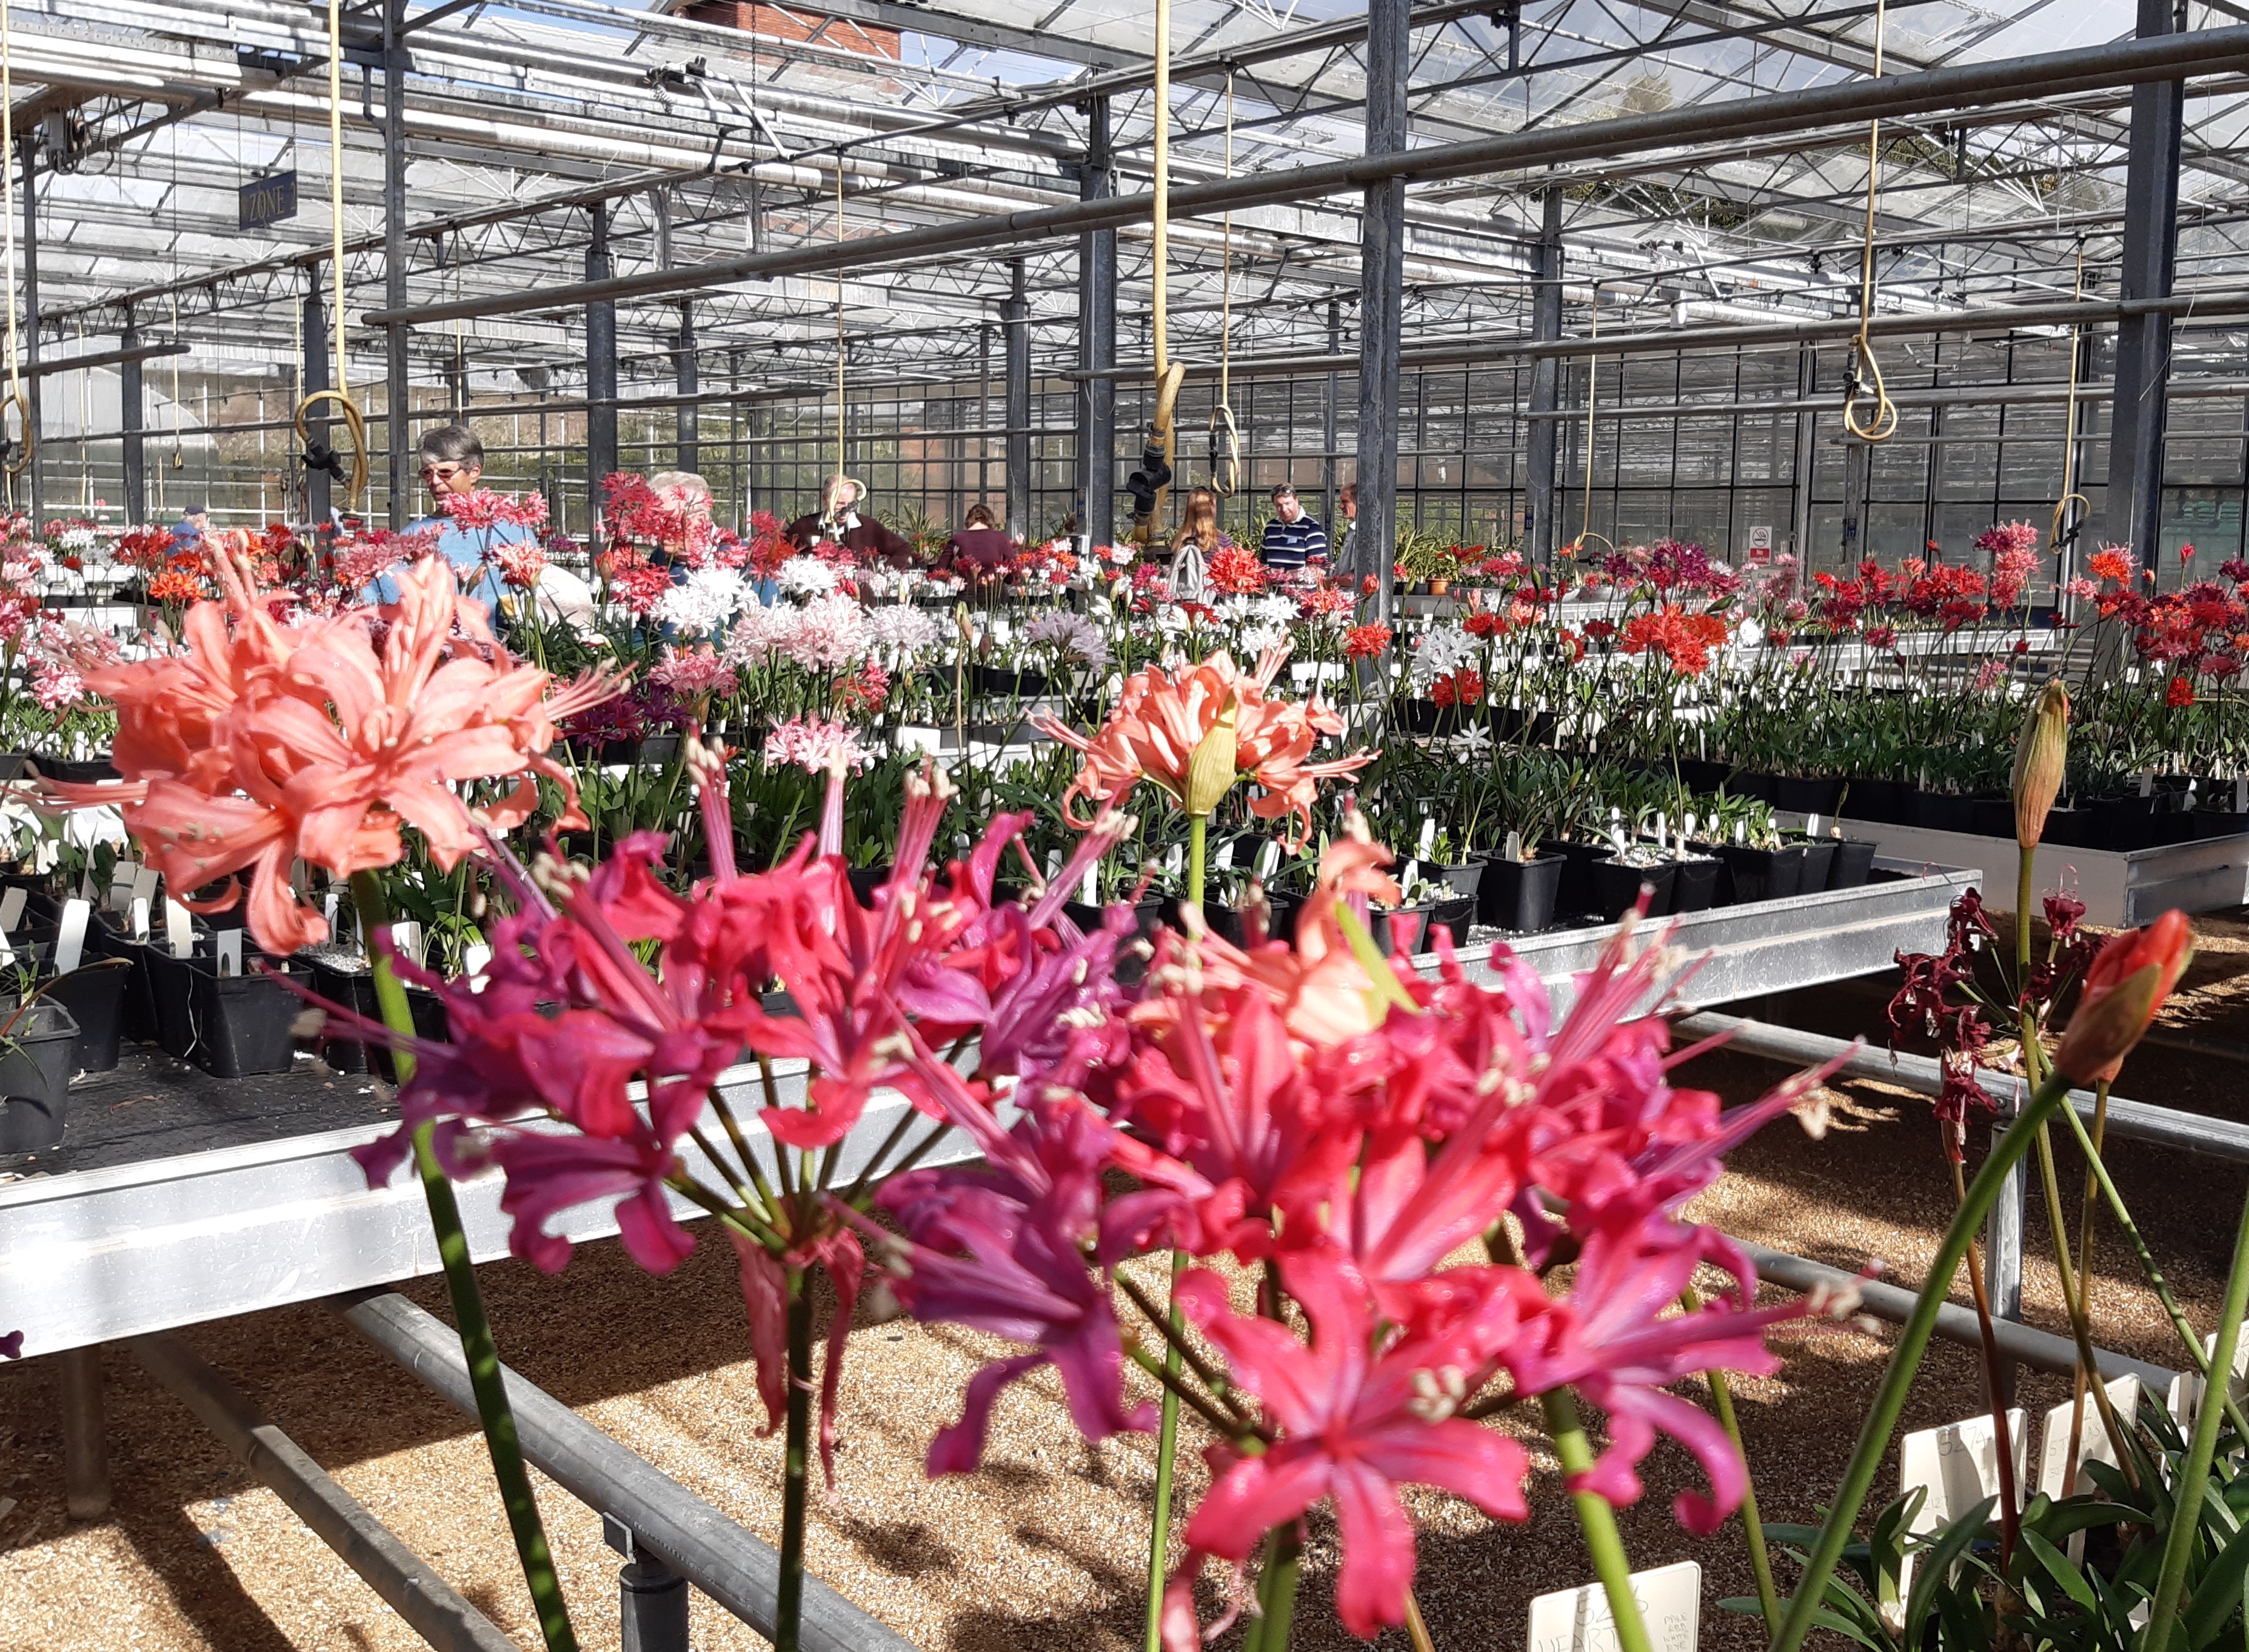 Members viewing the beautiful Nerine blooms in the glasshouse.